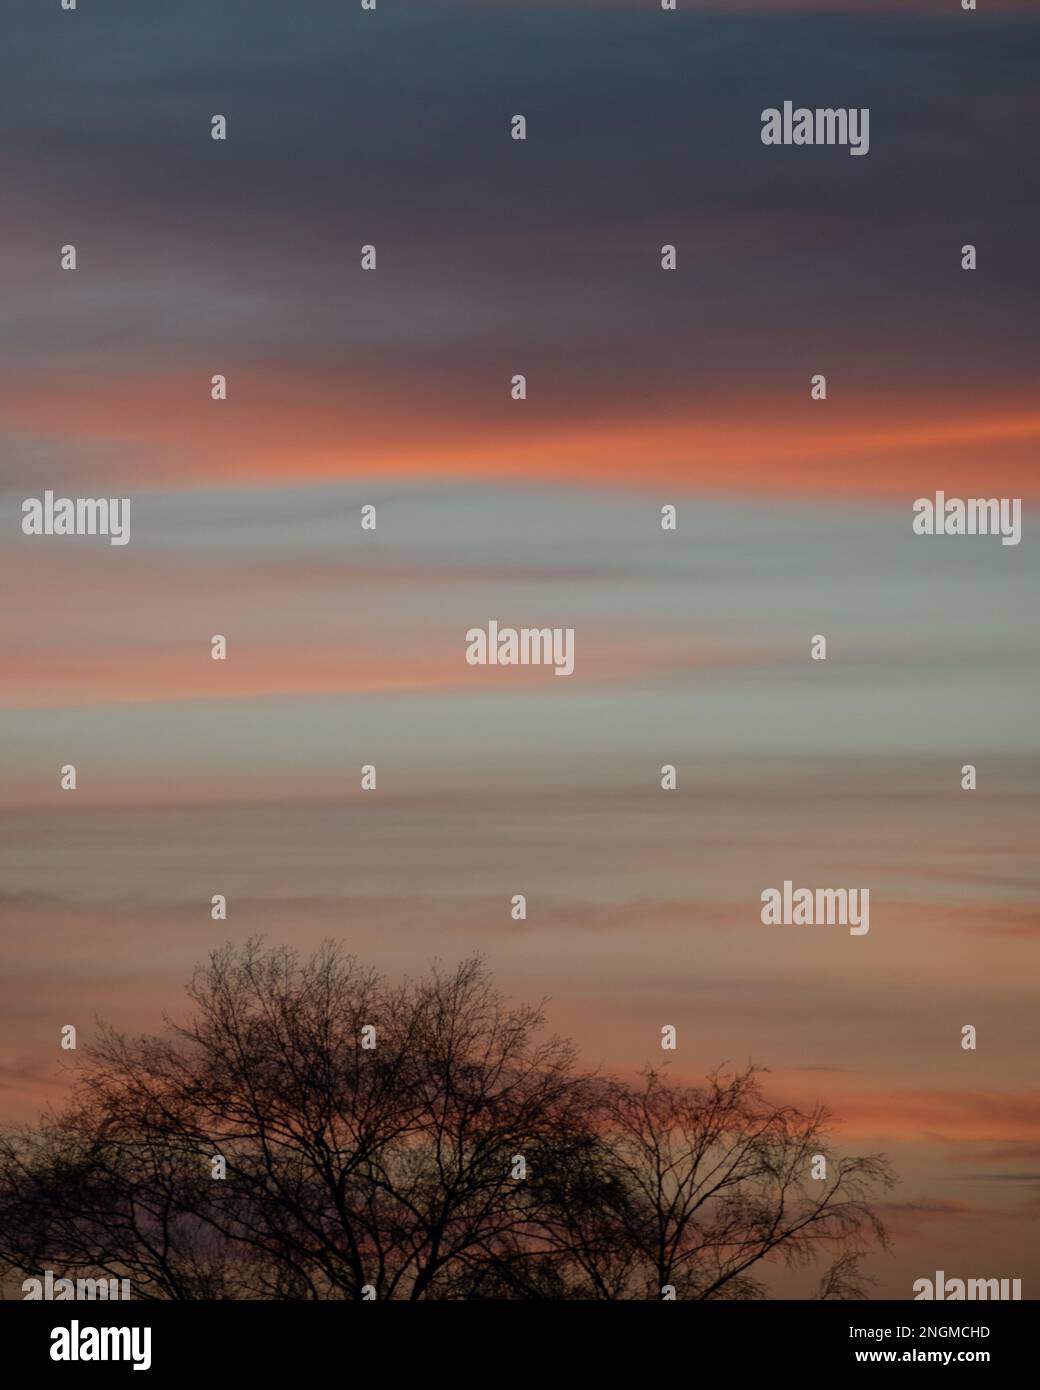 Muted orange and teal pastel sky with copy space Stock Photo